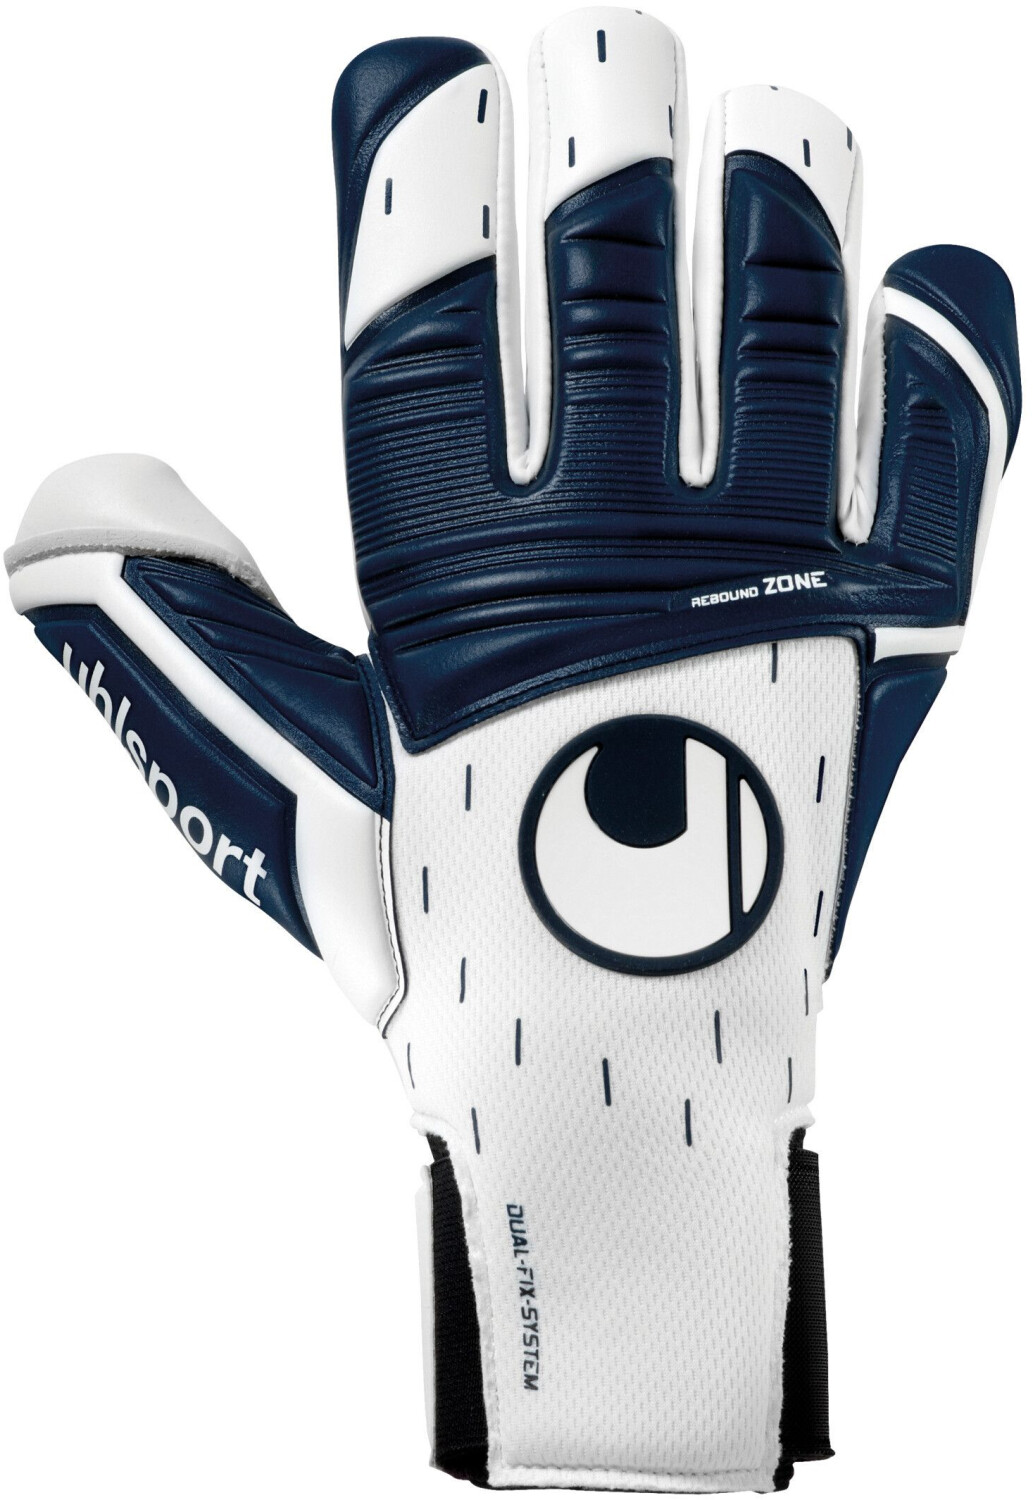 Photos - Other inventory Uhlsport Classic absolute grip Tight HN white blue F01 - (1011320 